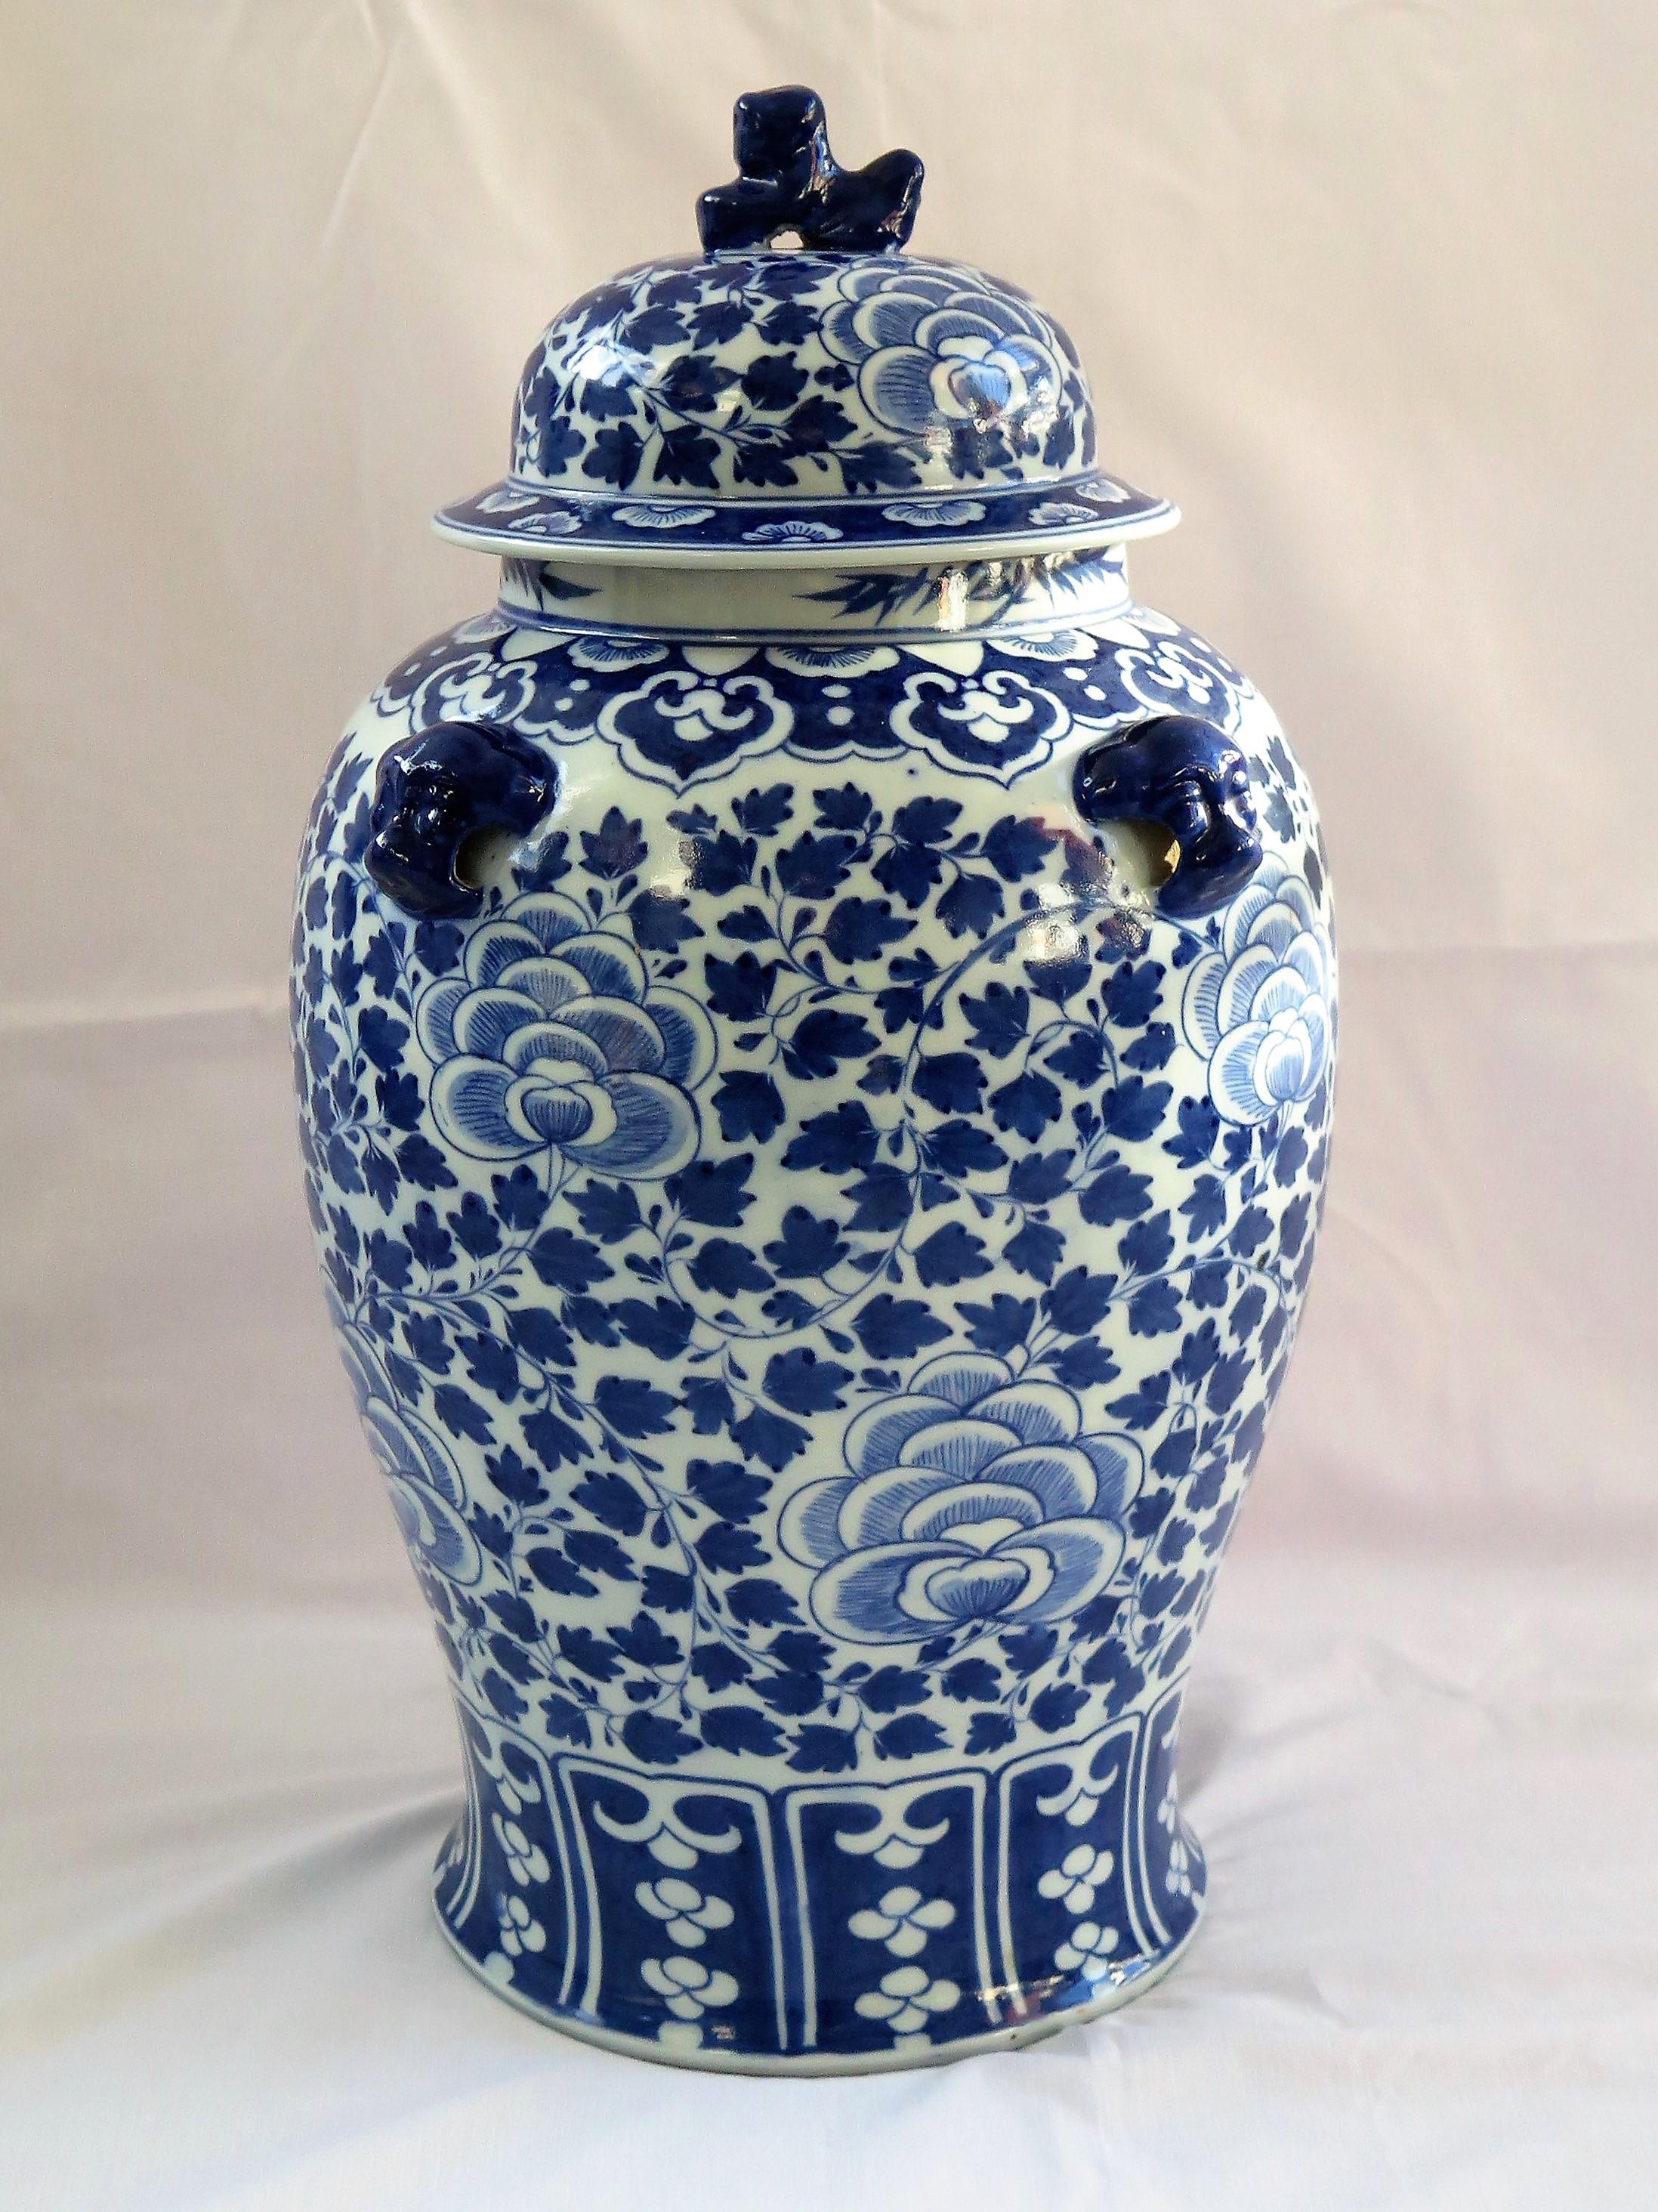 Hand-Painted Chinese Porcelain Large Lidded Vase or Jar Blue and White , 19th Century Qing